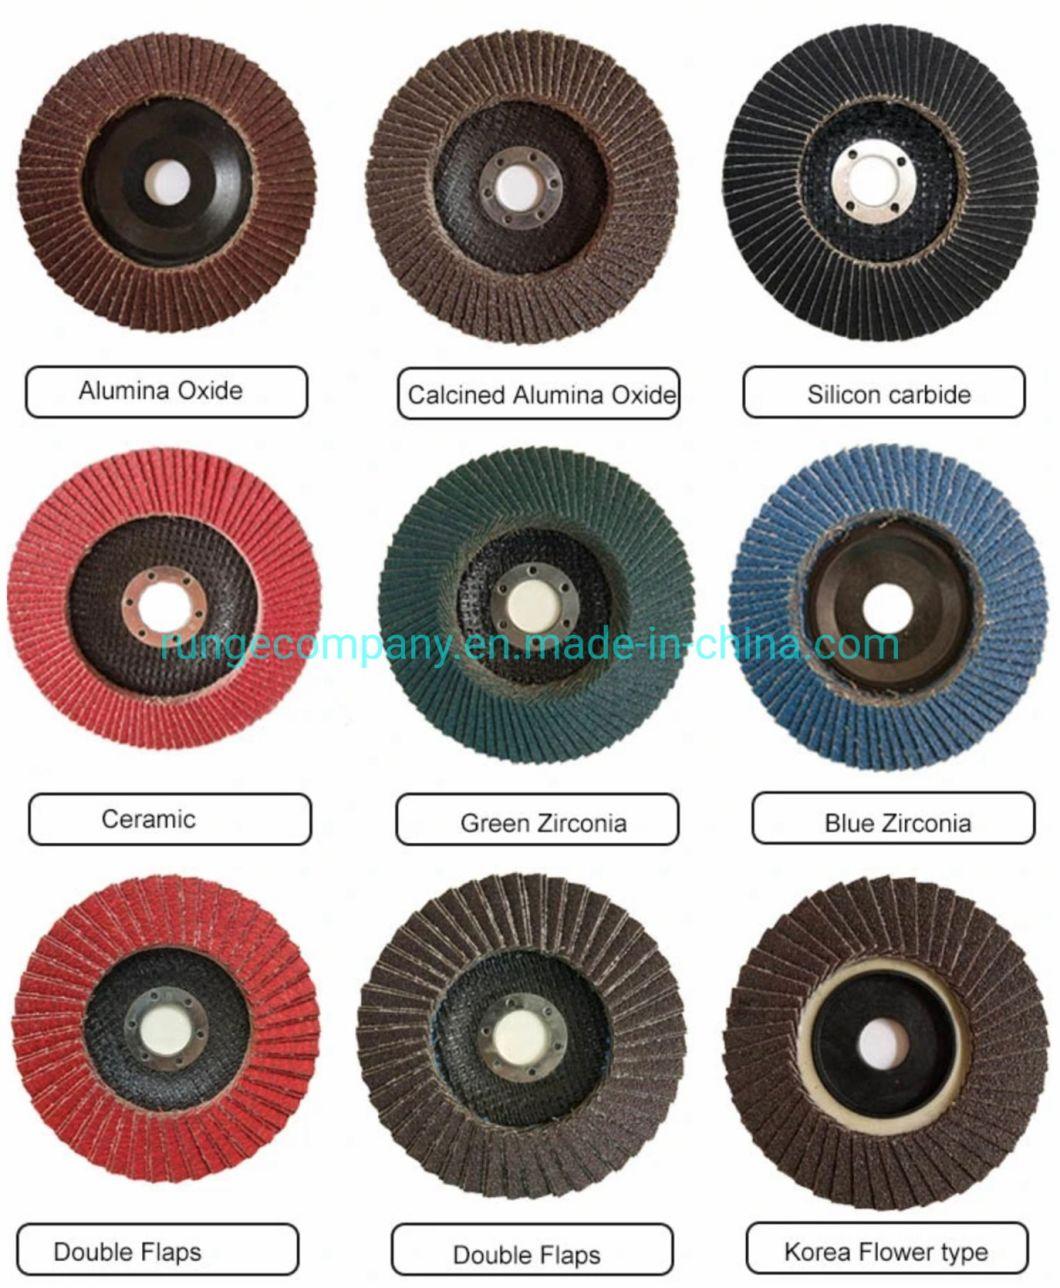 Power Electric Tools Accessories Metal Grinding Disc Wheels Long Life 100 X 6.0 mm 4" for Angle Grinder